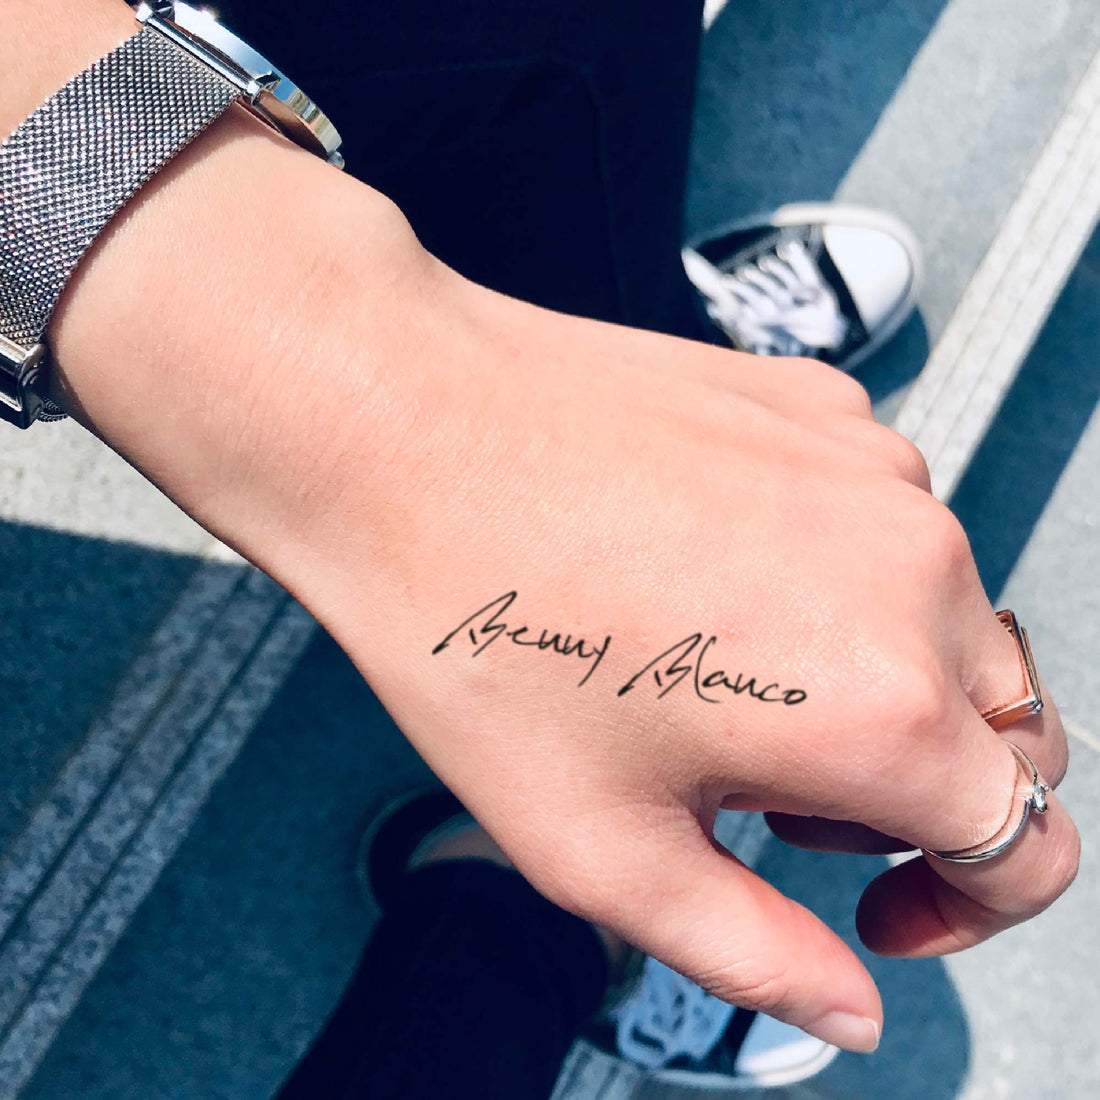 Benny Blanco custom temporary tattoo sticker design idea inspiration meanings removal arm wrist hand words font name signature calligraphy lyrics tour concert outfits merch accessory gift souvenir costumes wear dress up code